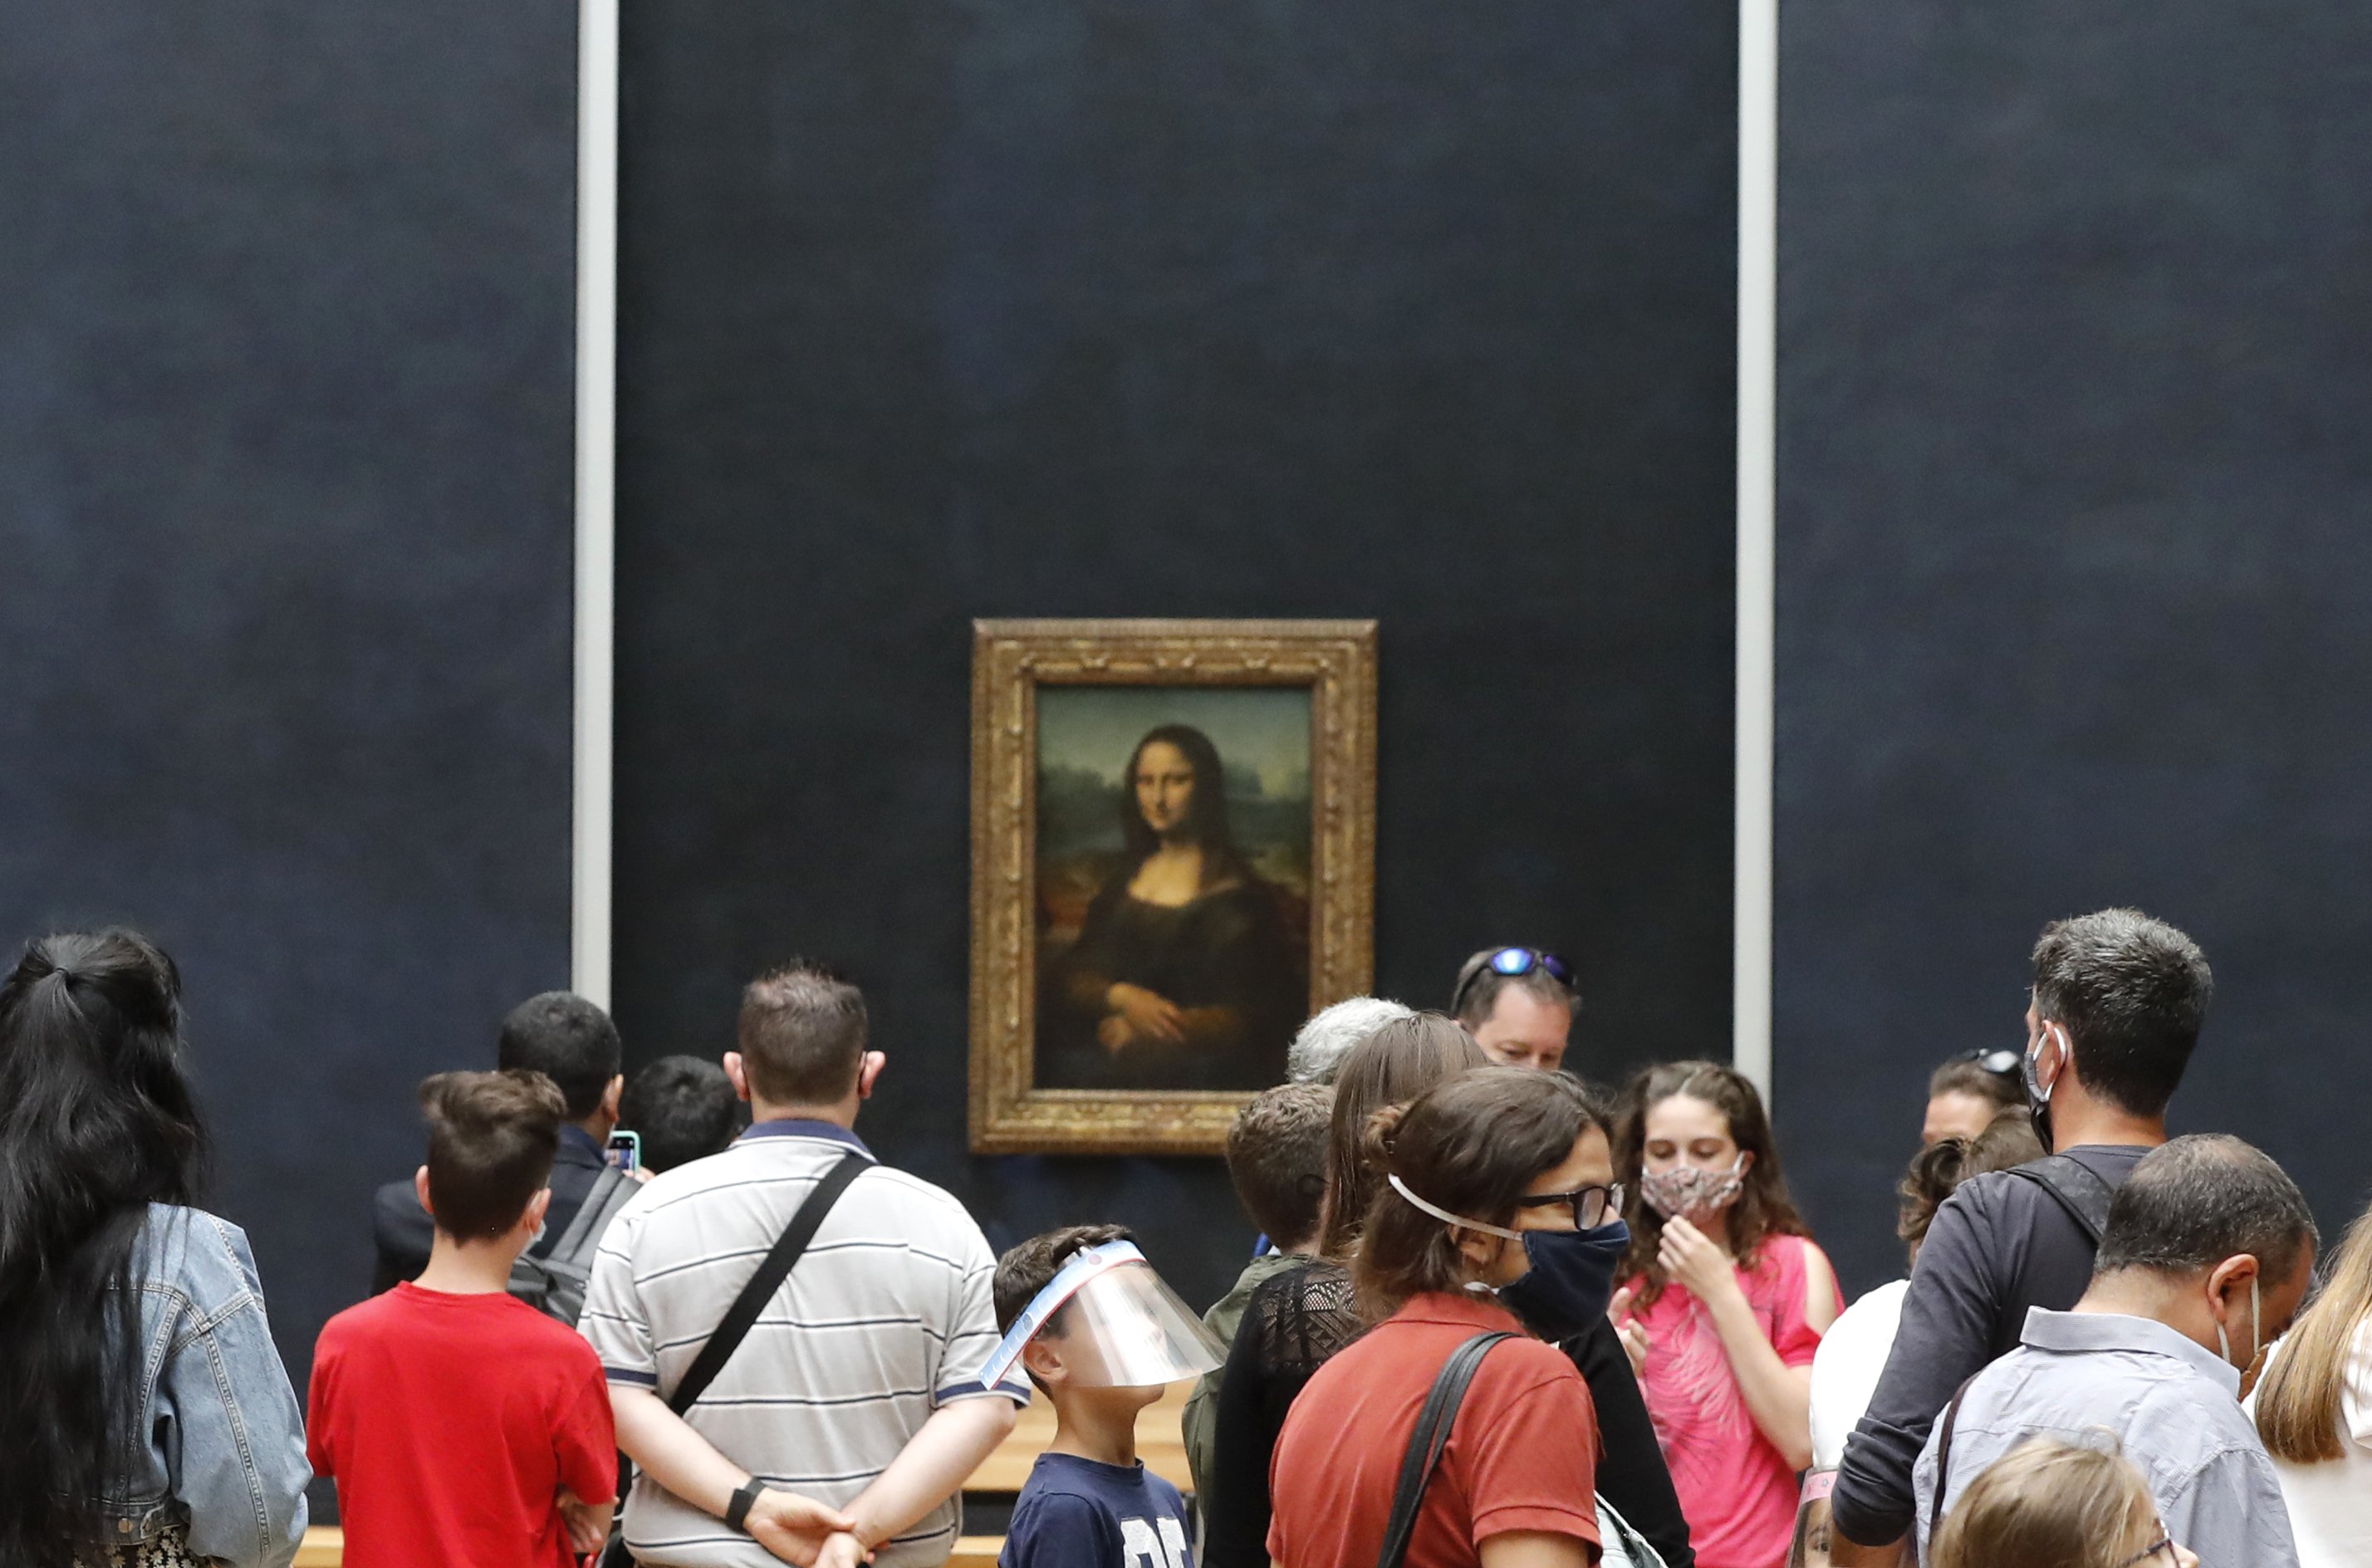 The Mona Lisa painting in a display at the Louvre, surrounded by a crowd of visitors.